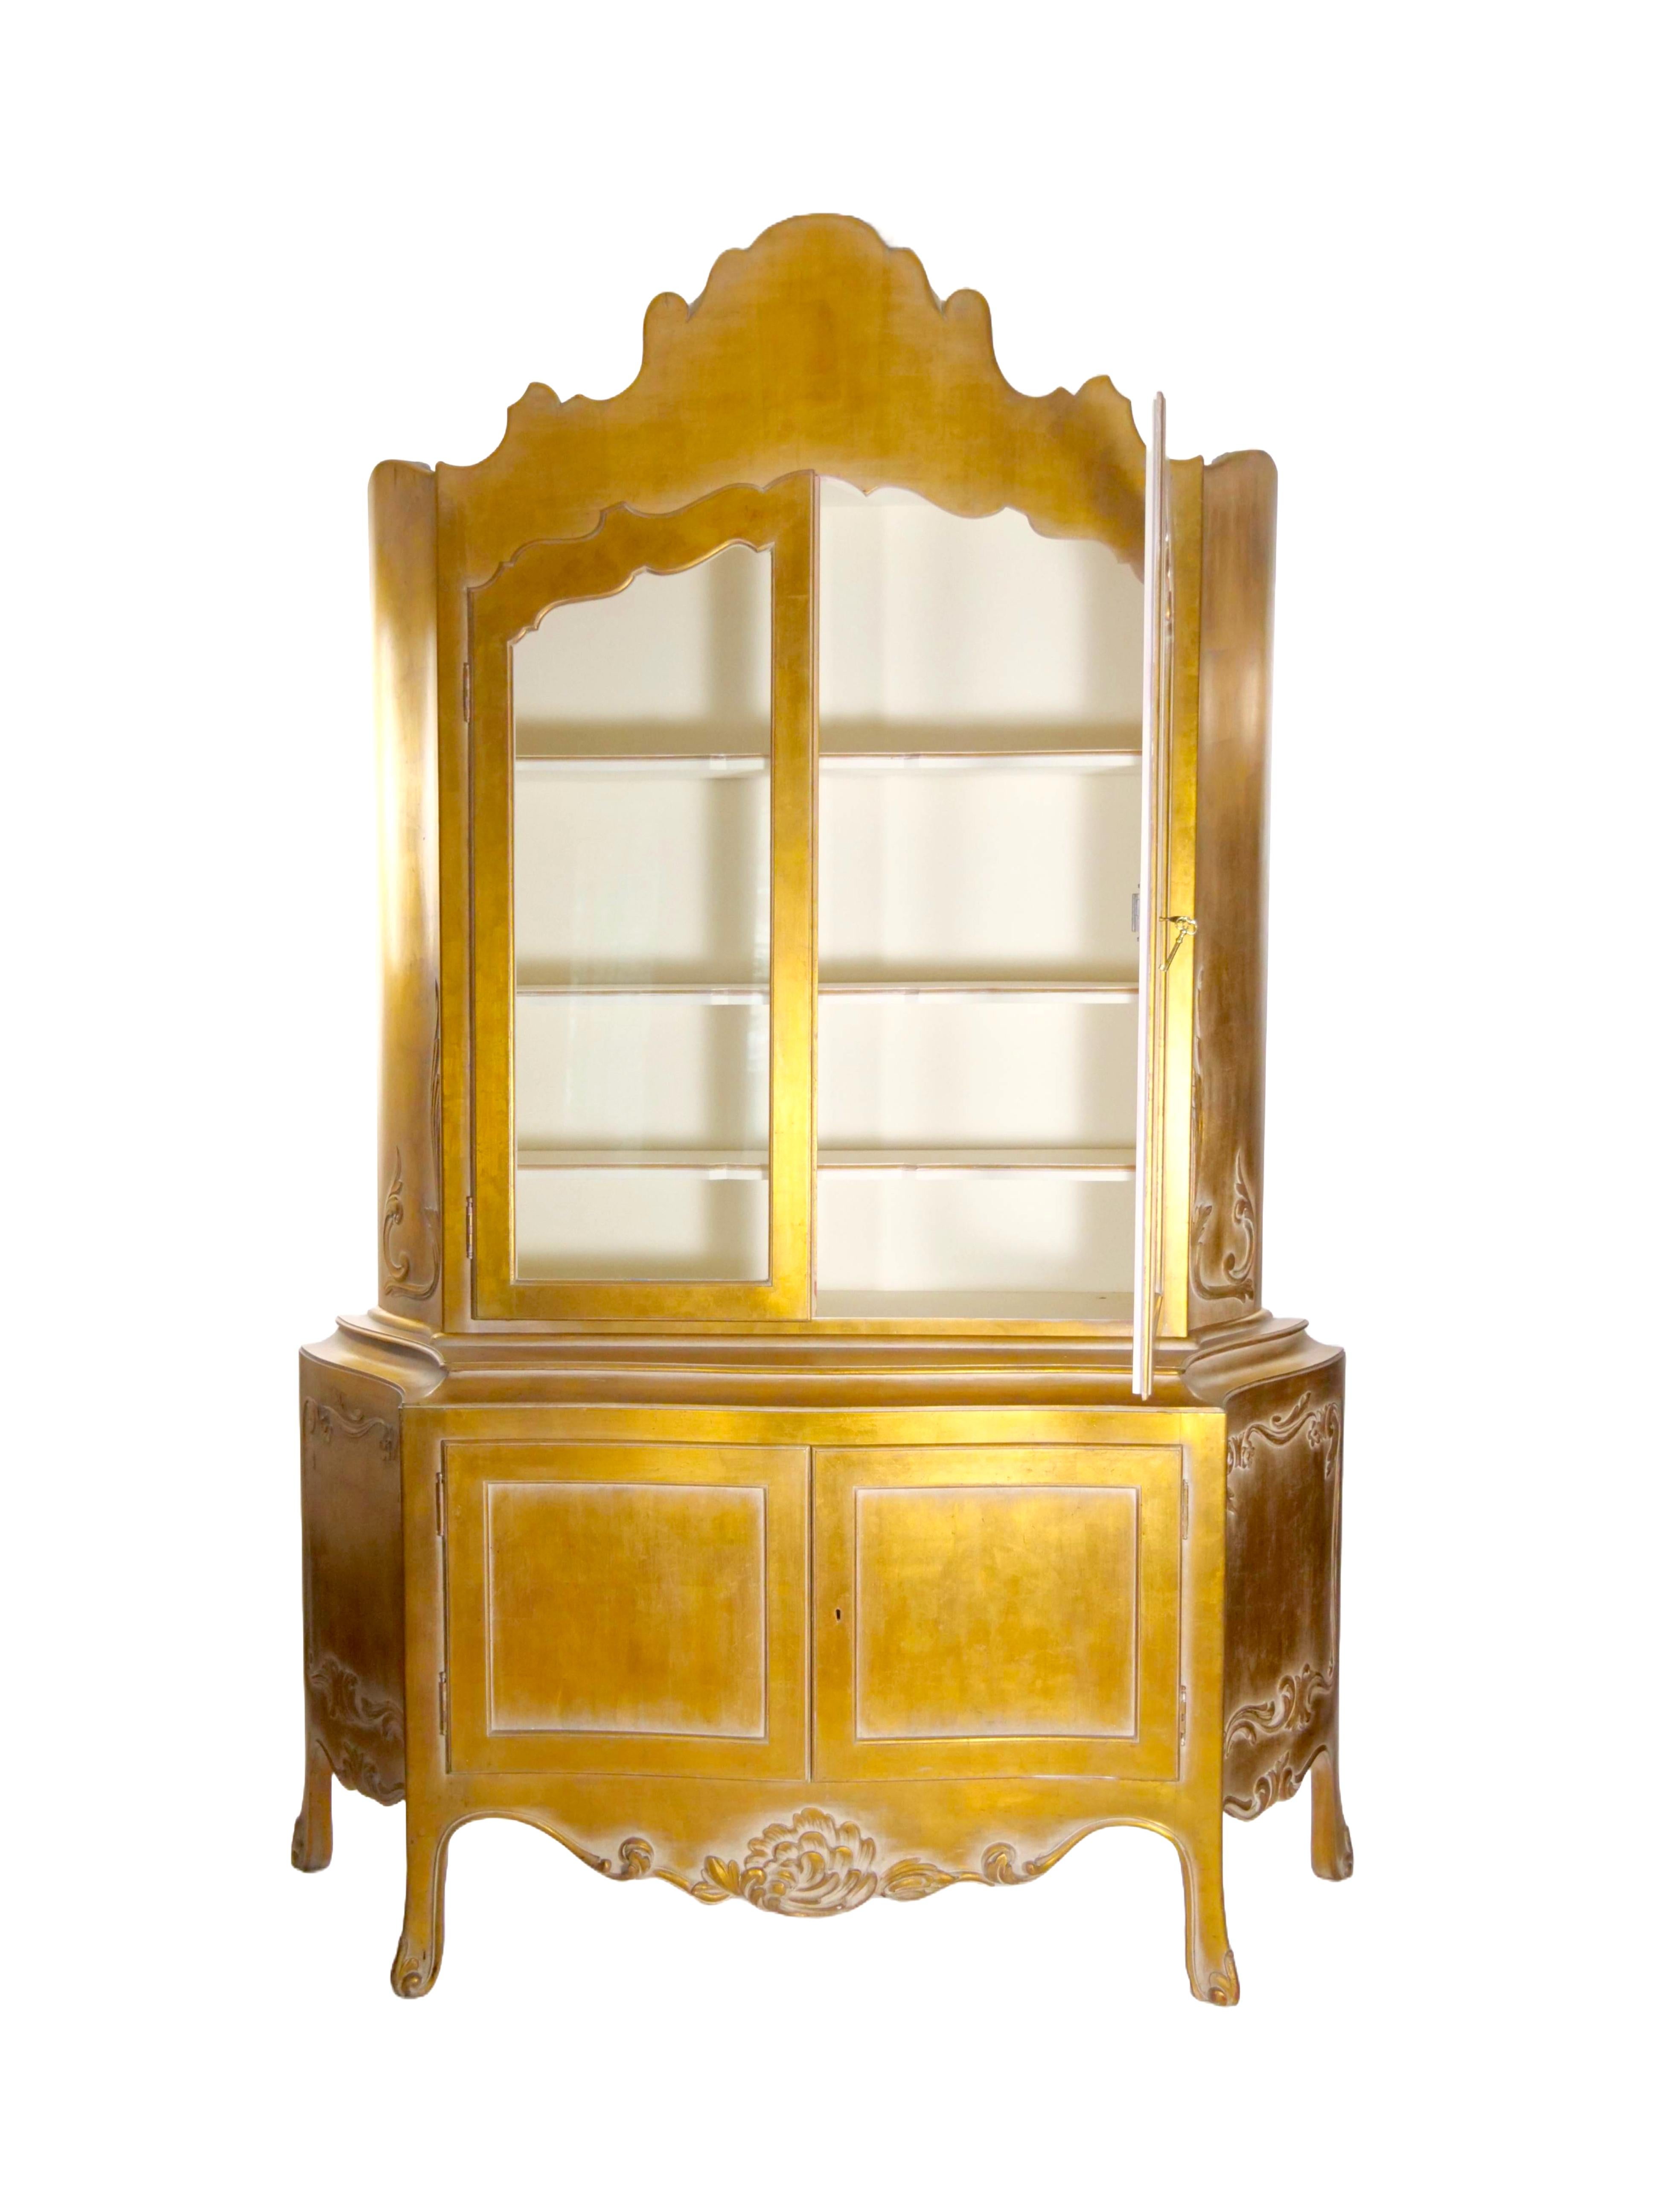 Elevate your living space with our Mid-20th Century Italian Hand-Carved Wood Gilt Gold Painted Exterior Two-Part Display Cabinet—a true testament to craftsmanship and timeless design. This exquisite cabinet showcases intricate carved wood details on